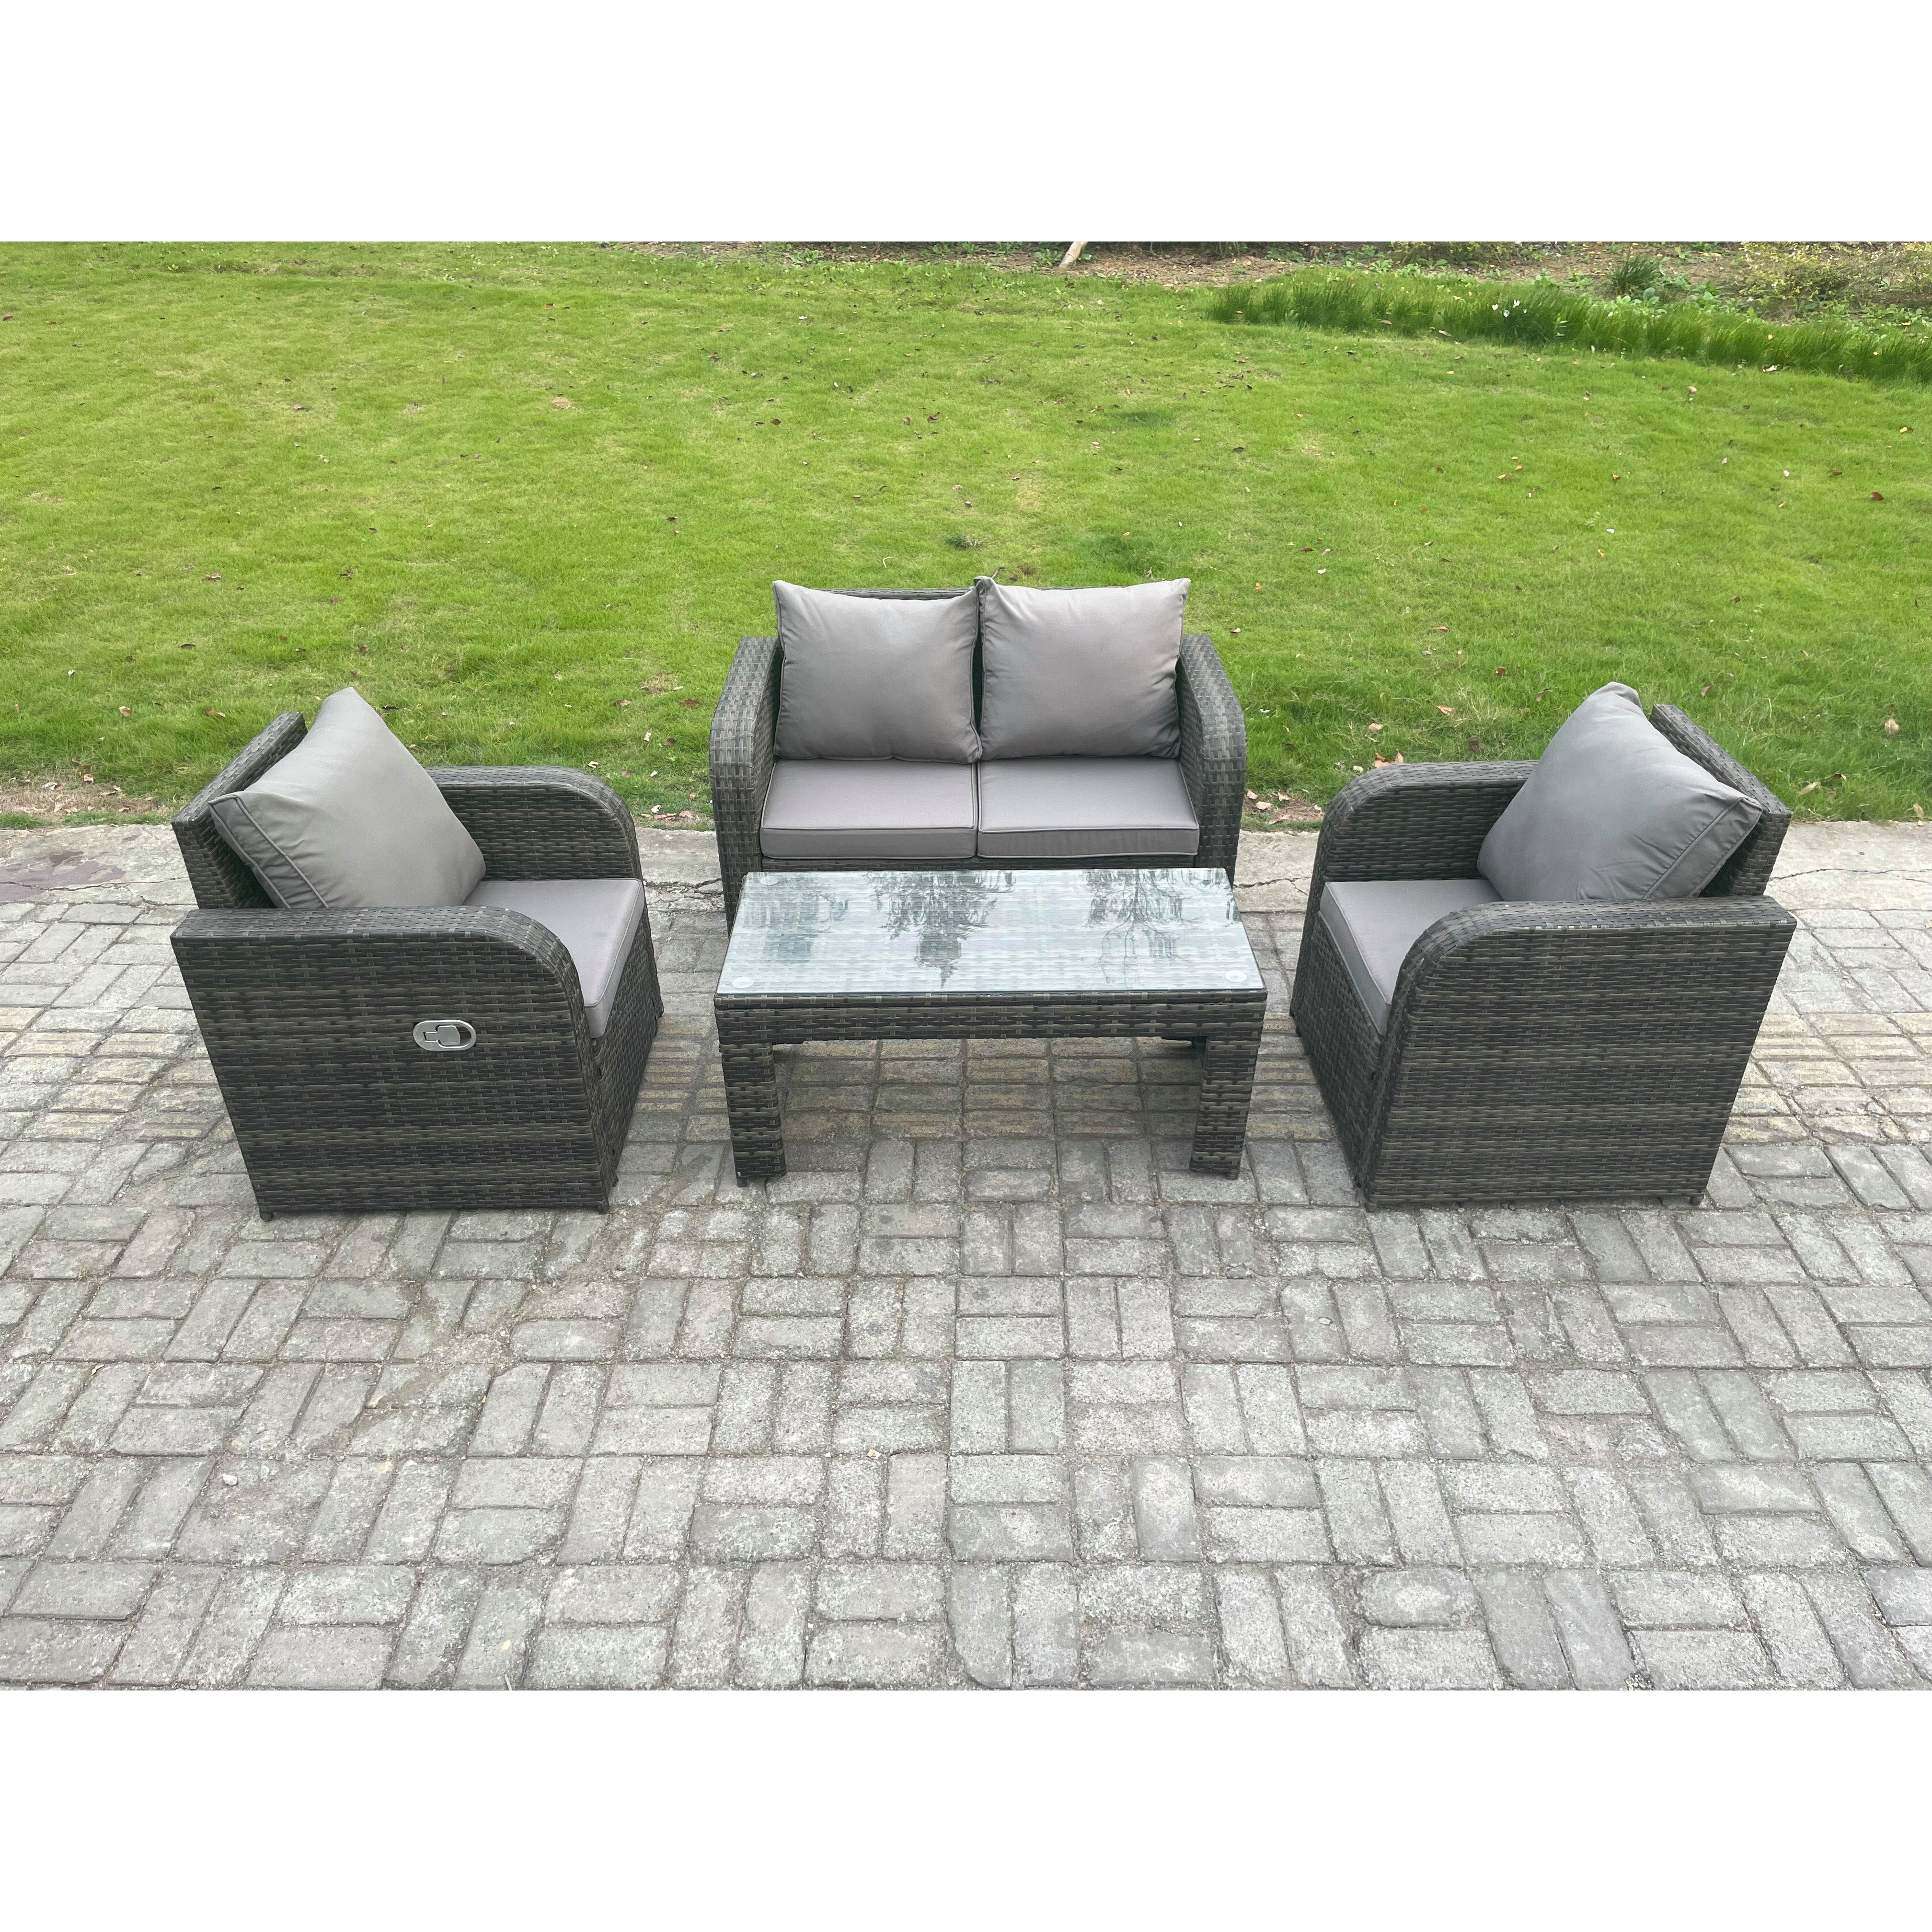 Outdoor Garden Furniture Sets Wicker Rattan Furniture Sofa Sets with Rectangular Coffee Table Love seat Sofa - image 1